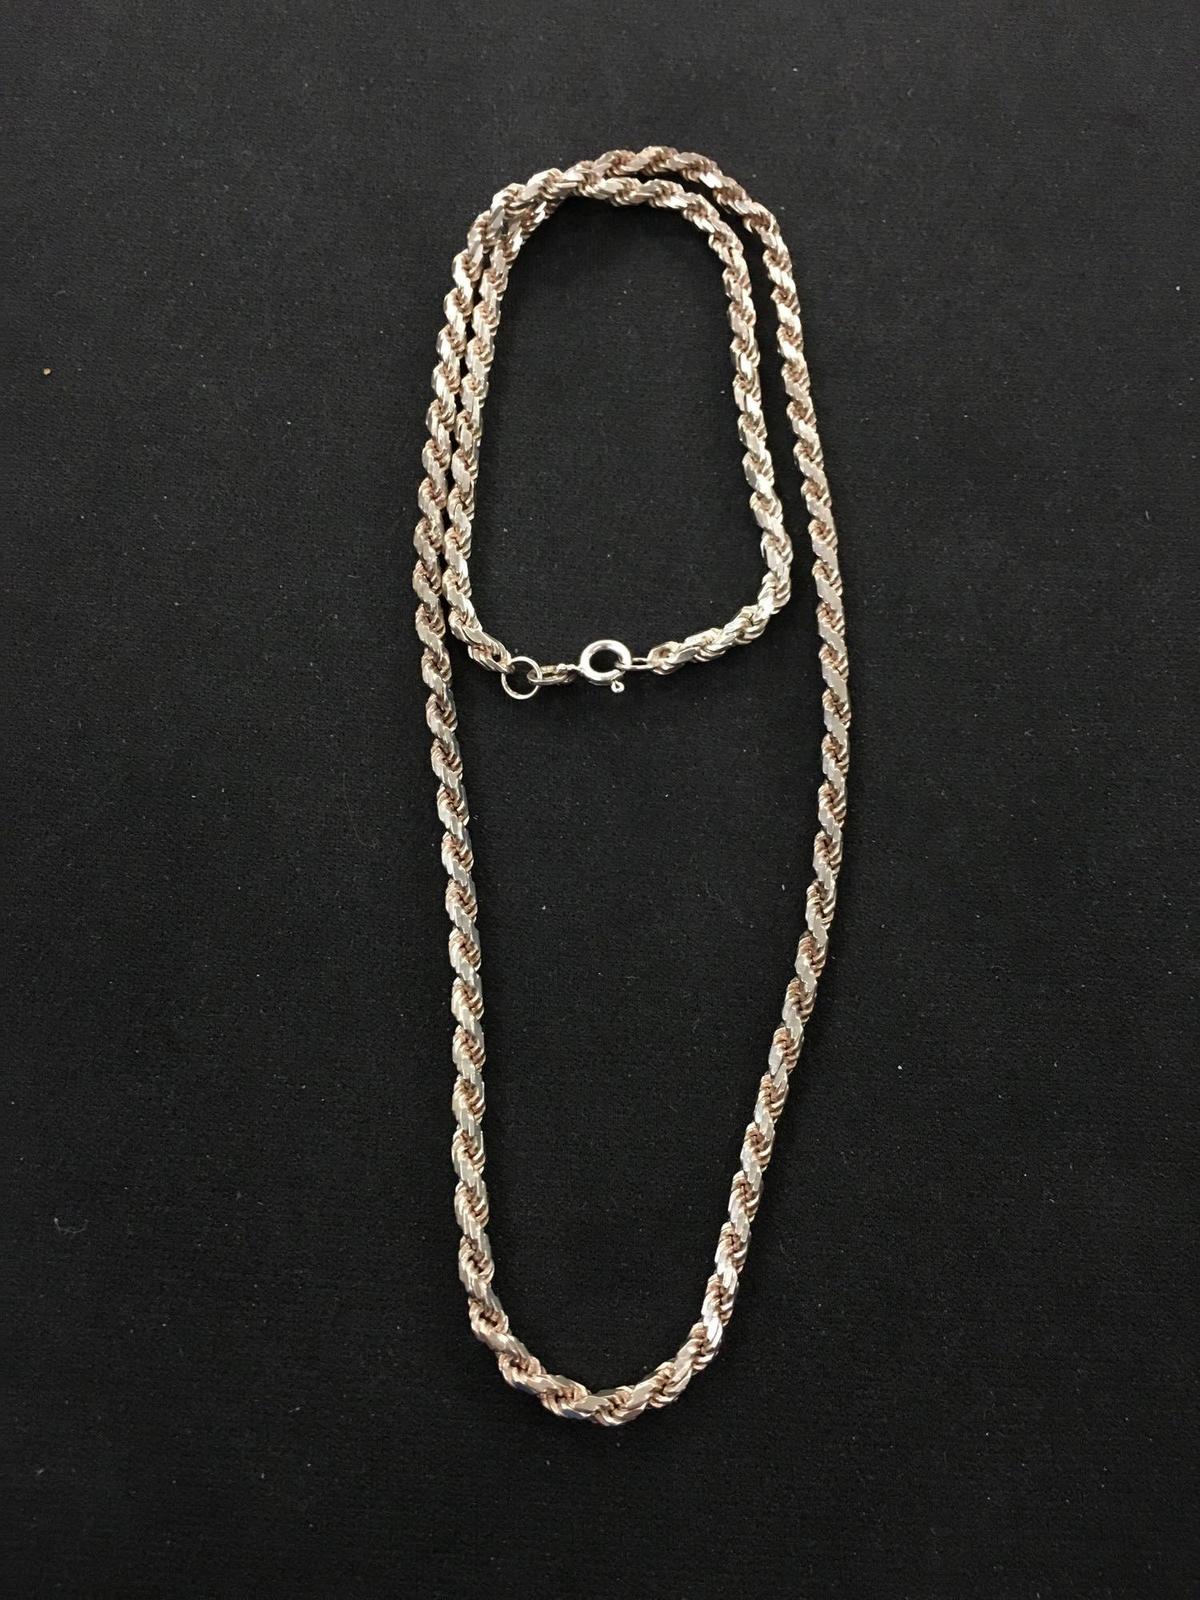 Medium Italian Made 18" Sterling Silver Rope Chain